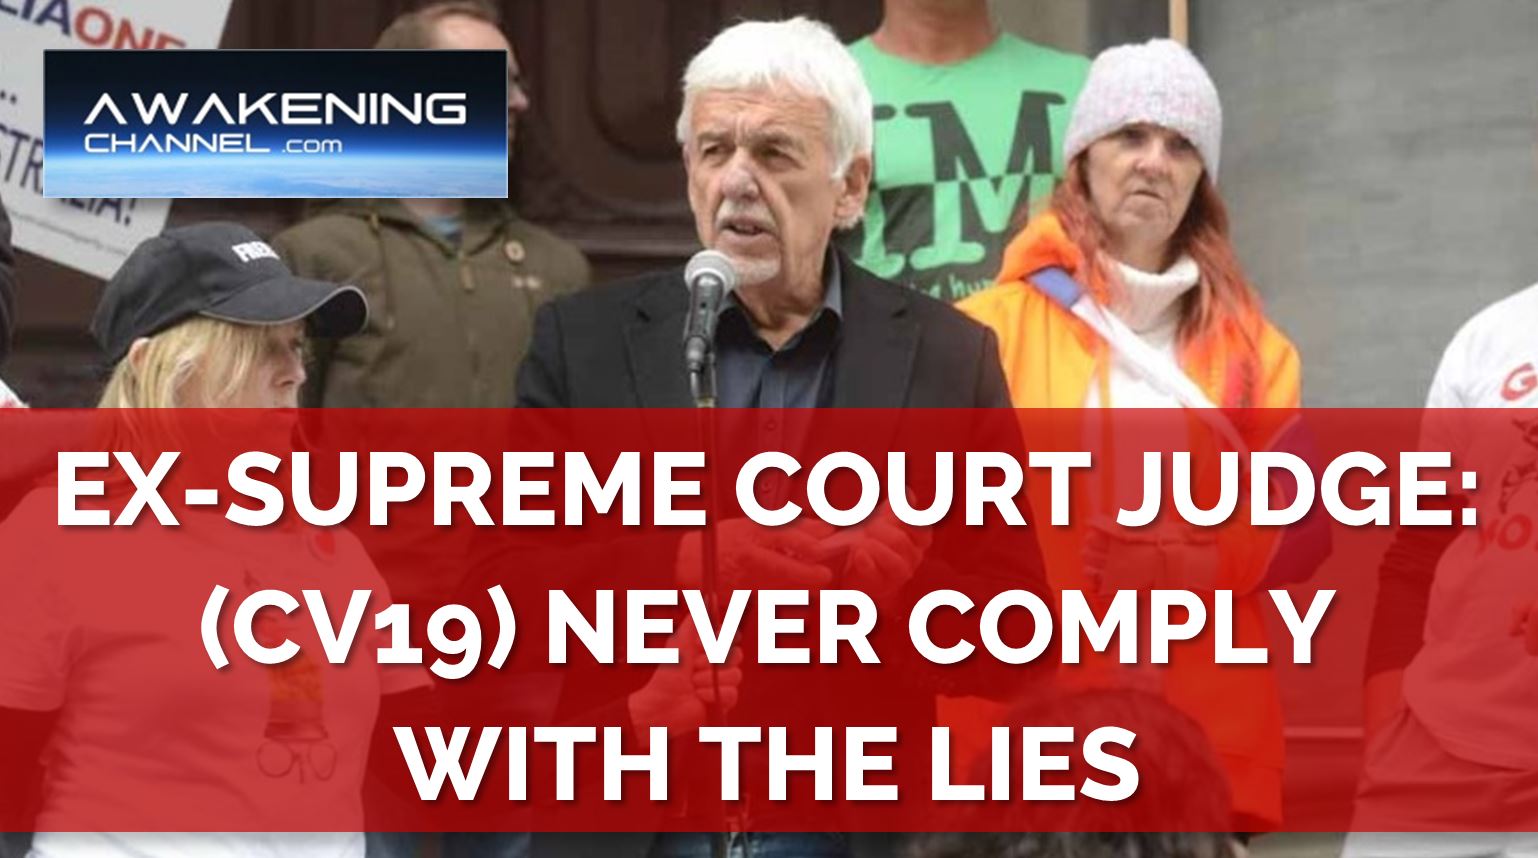 Retired Supreme Court Judge: (CV19) This is Tyranny. Never Comply with the Lies